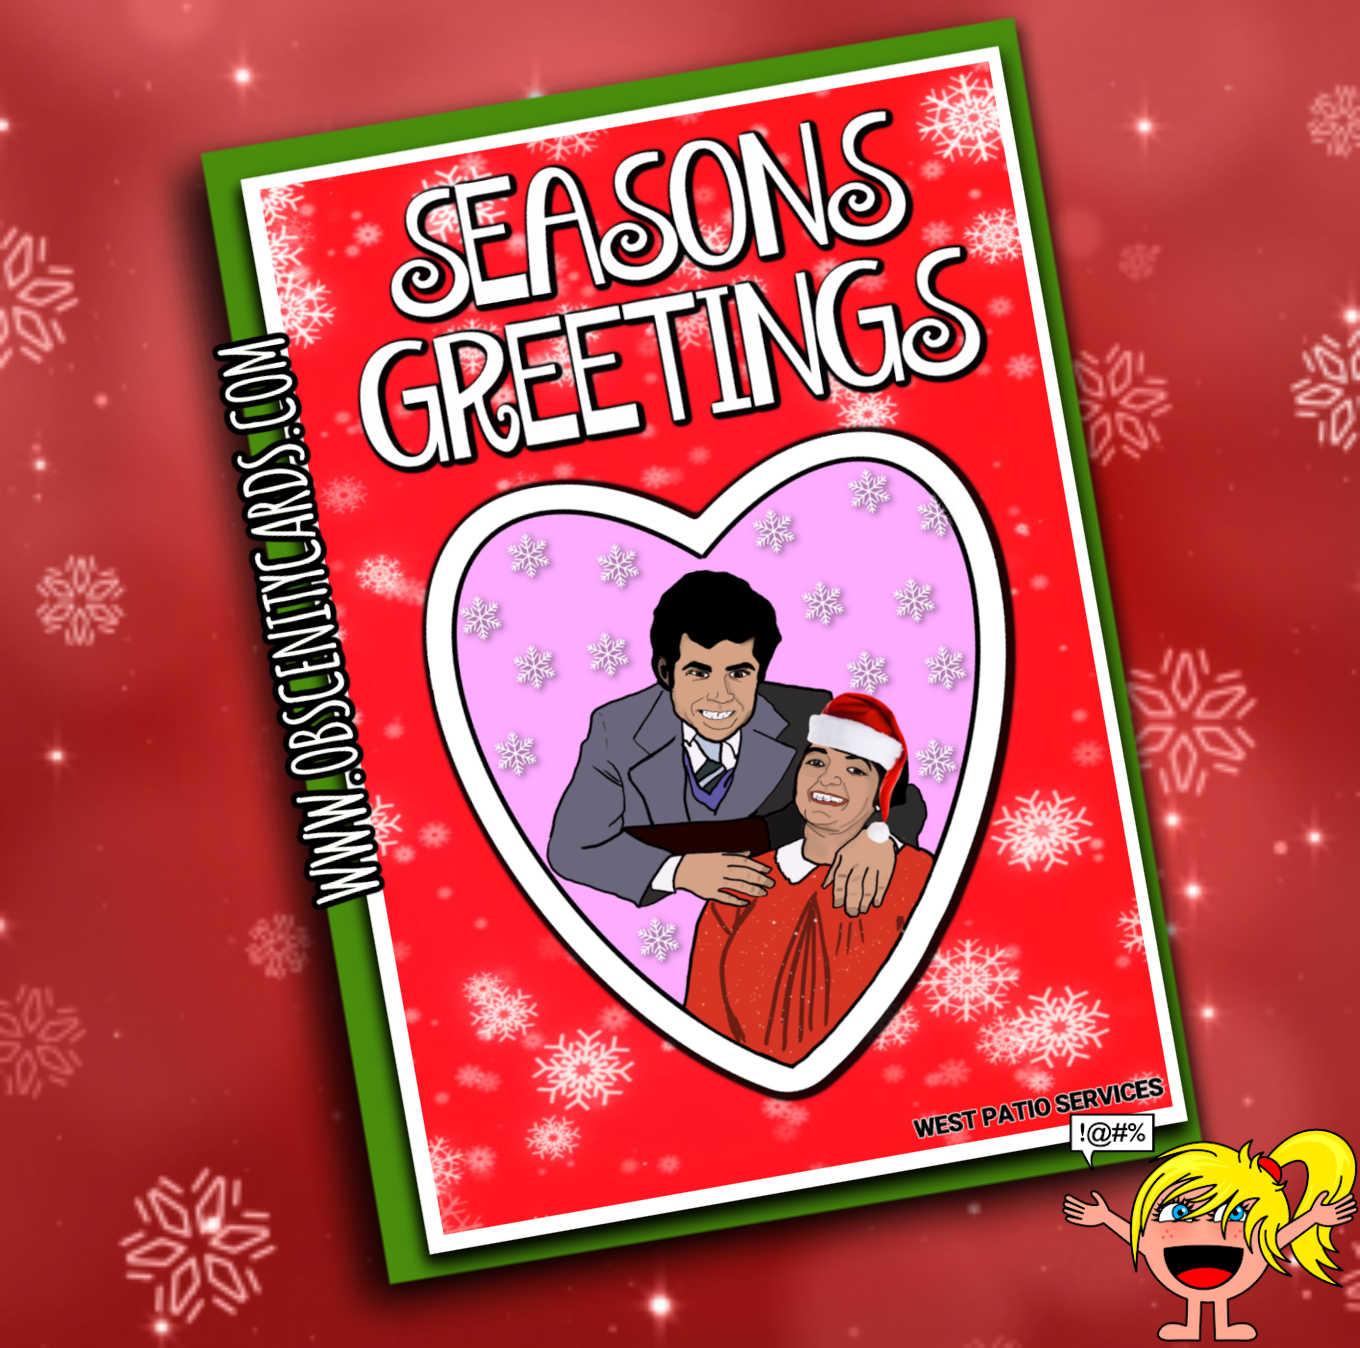 SEASONS GREETINGS FRED AND ROSE WEST CHRISTMAS CARD